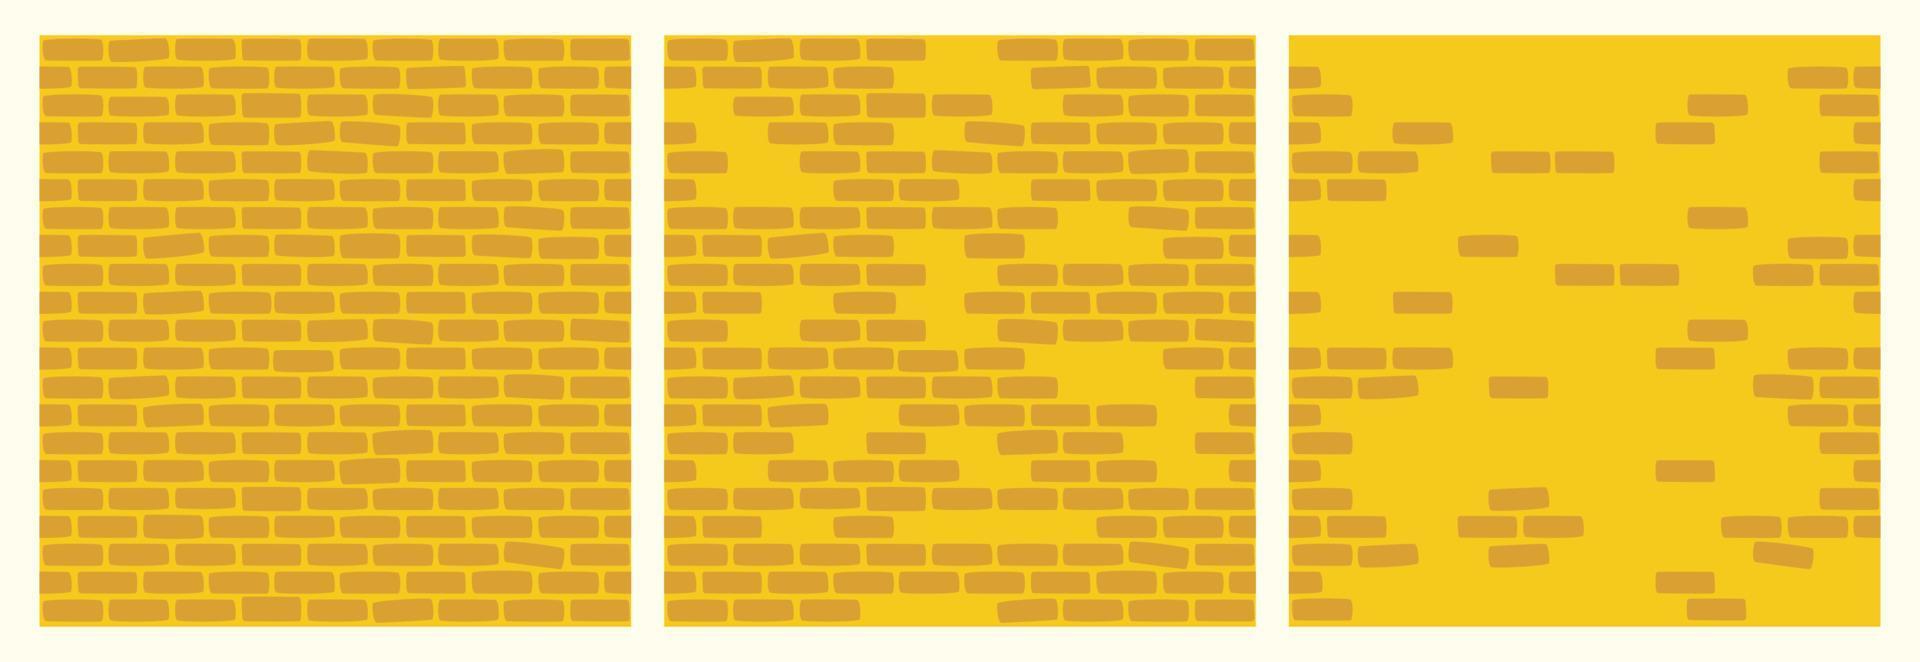 Set of Brick Wall Patterns of Yellow Color. Building Construction Blocks Seamless Background Collection for Game, Web Design, Textile, Prints And Cafes. vector